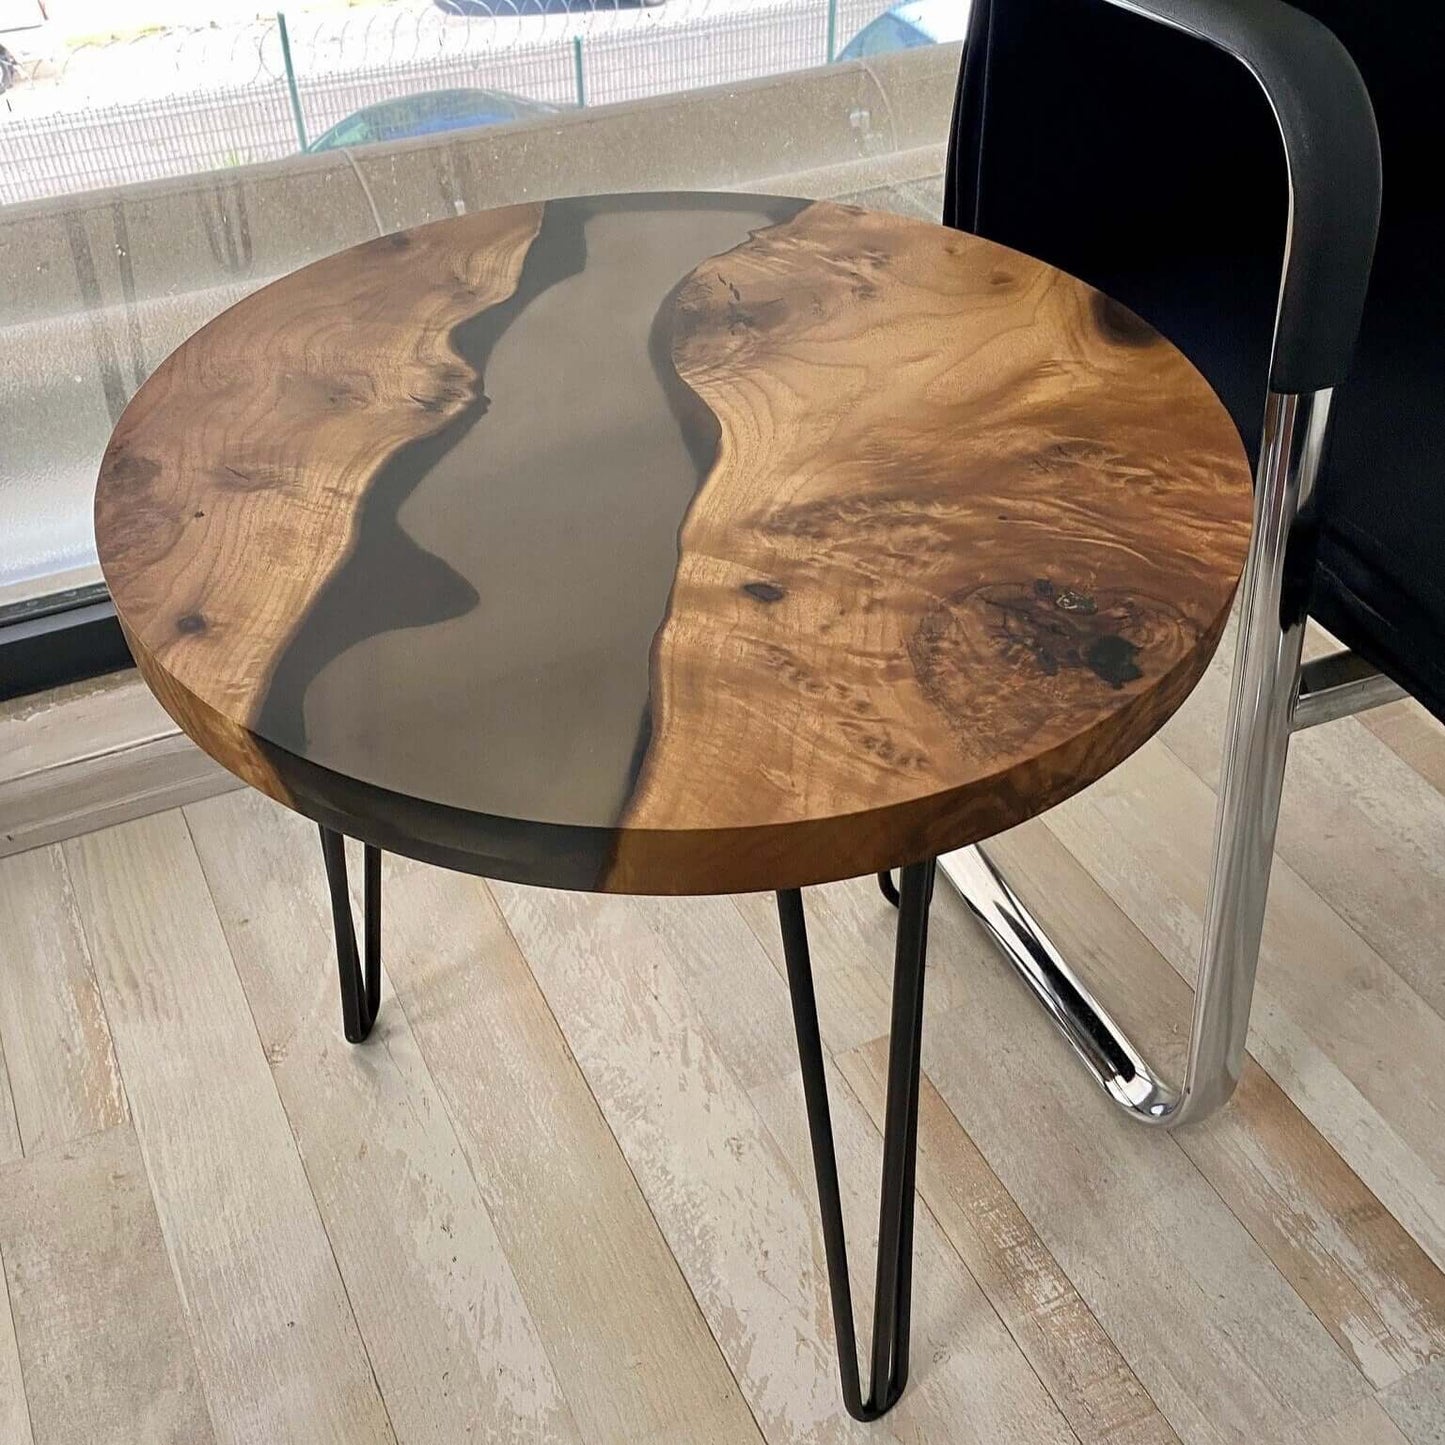 Black and Wooden Epoxy Resin Coffee Table For Home Decor-0